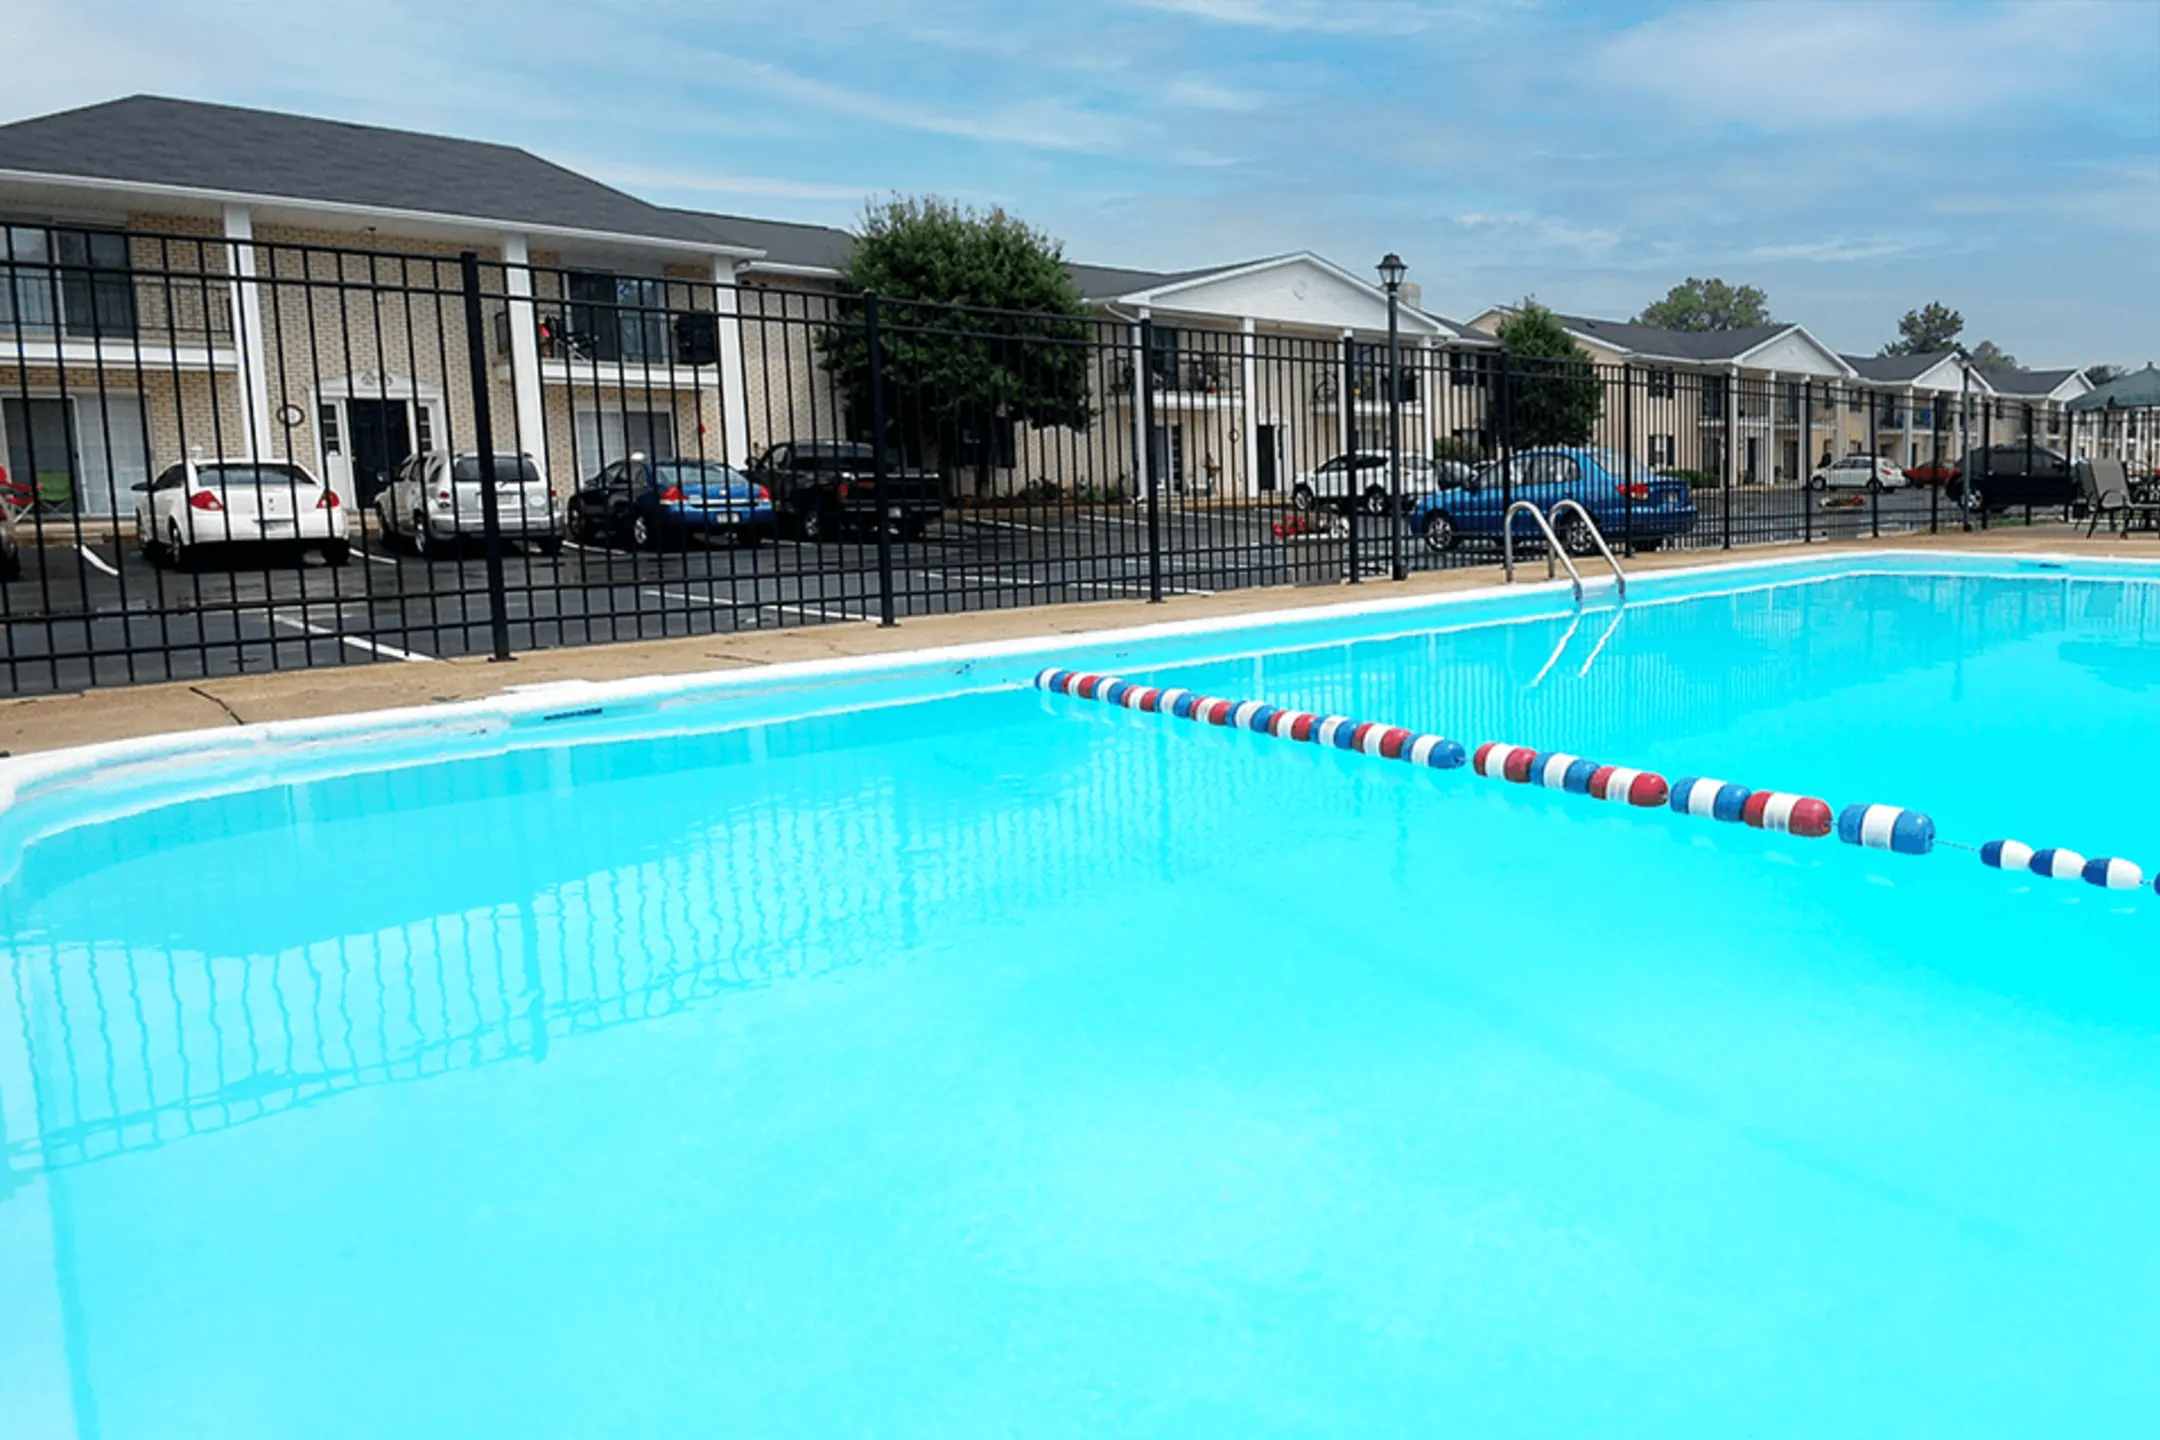 Pool - Addison Place Apartments of Evansville - Evansville, IN